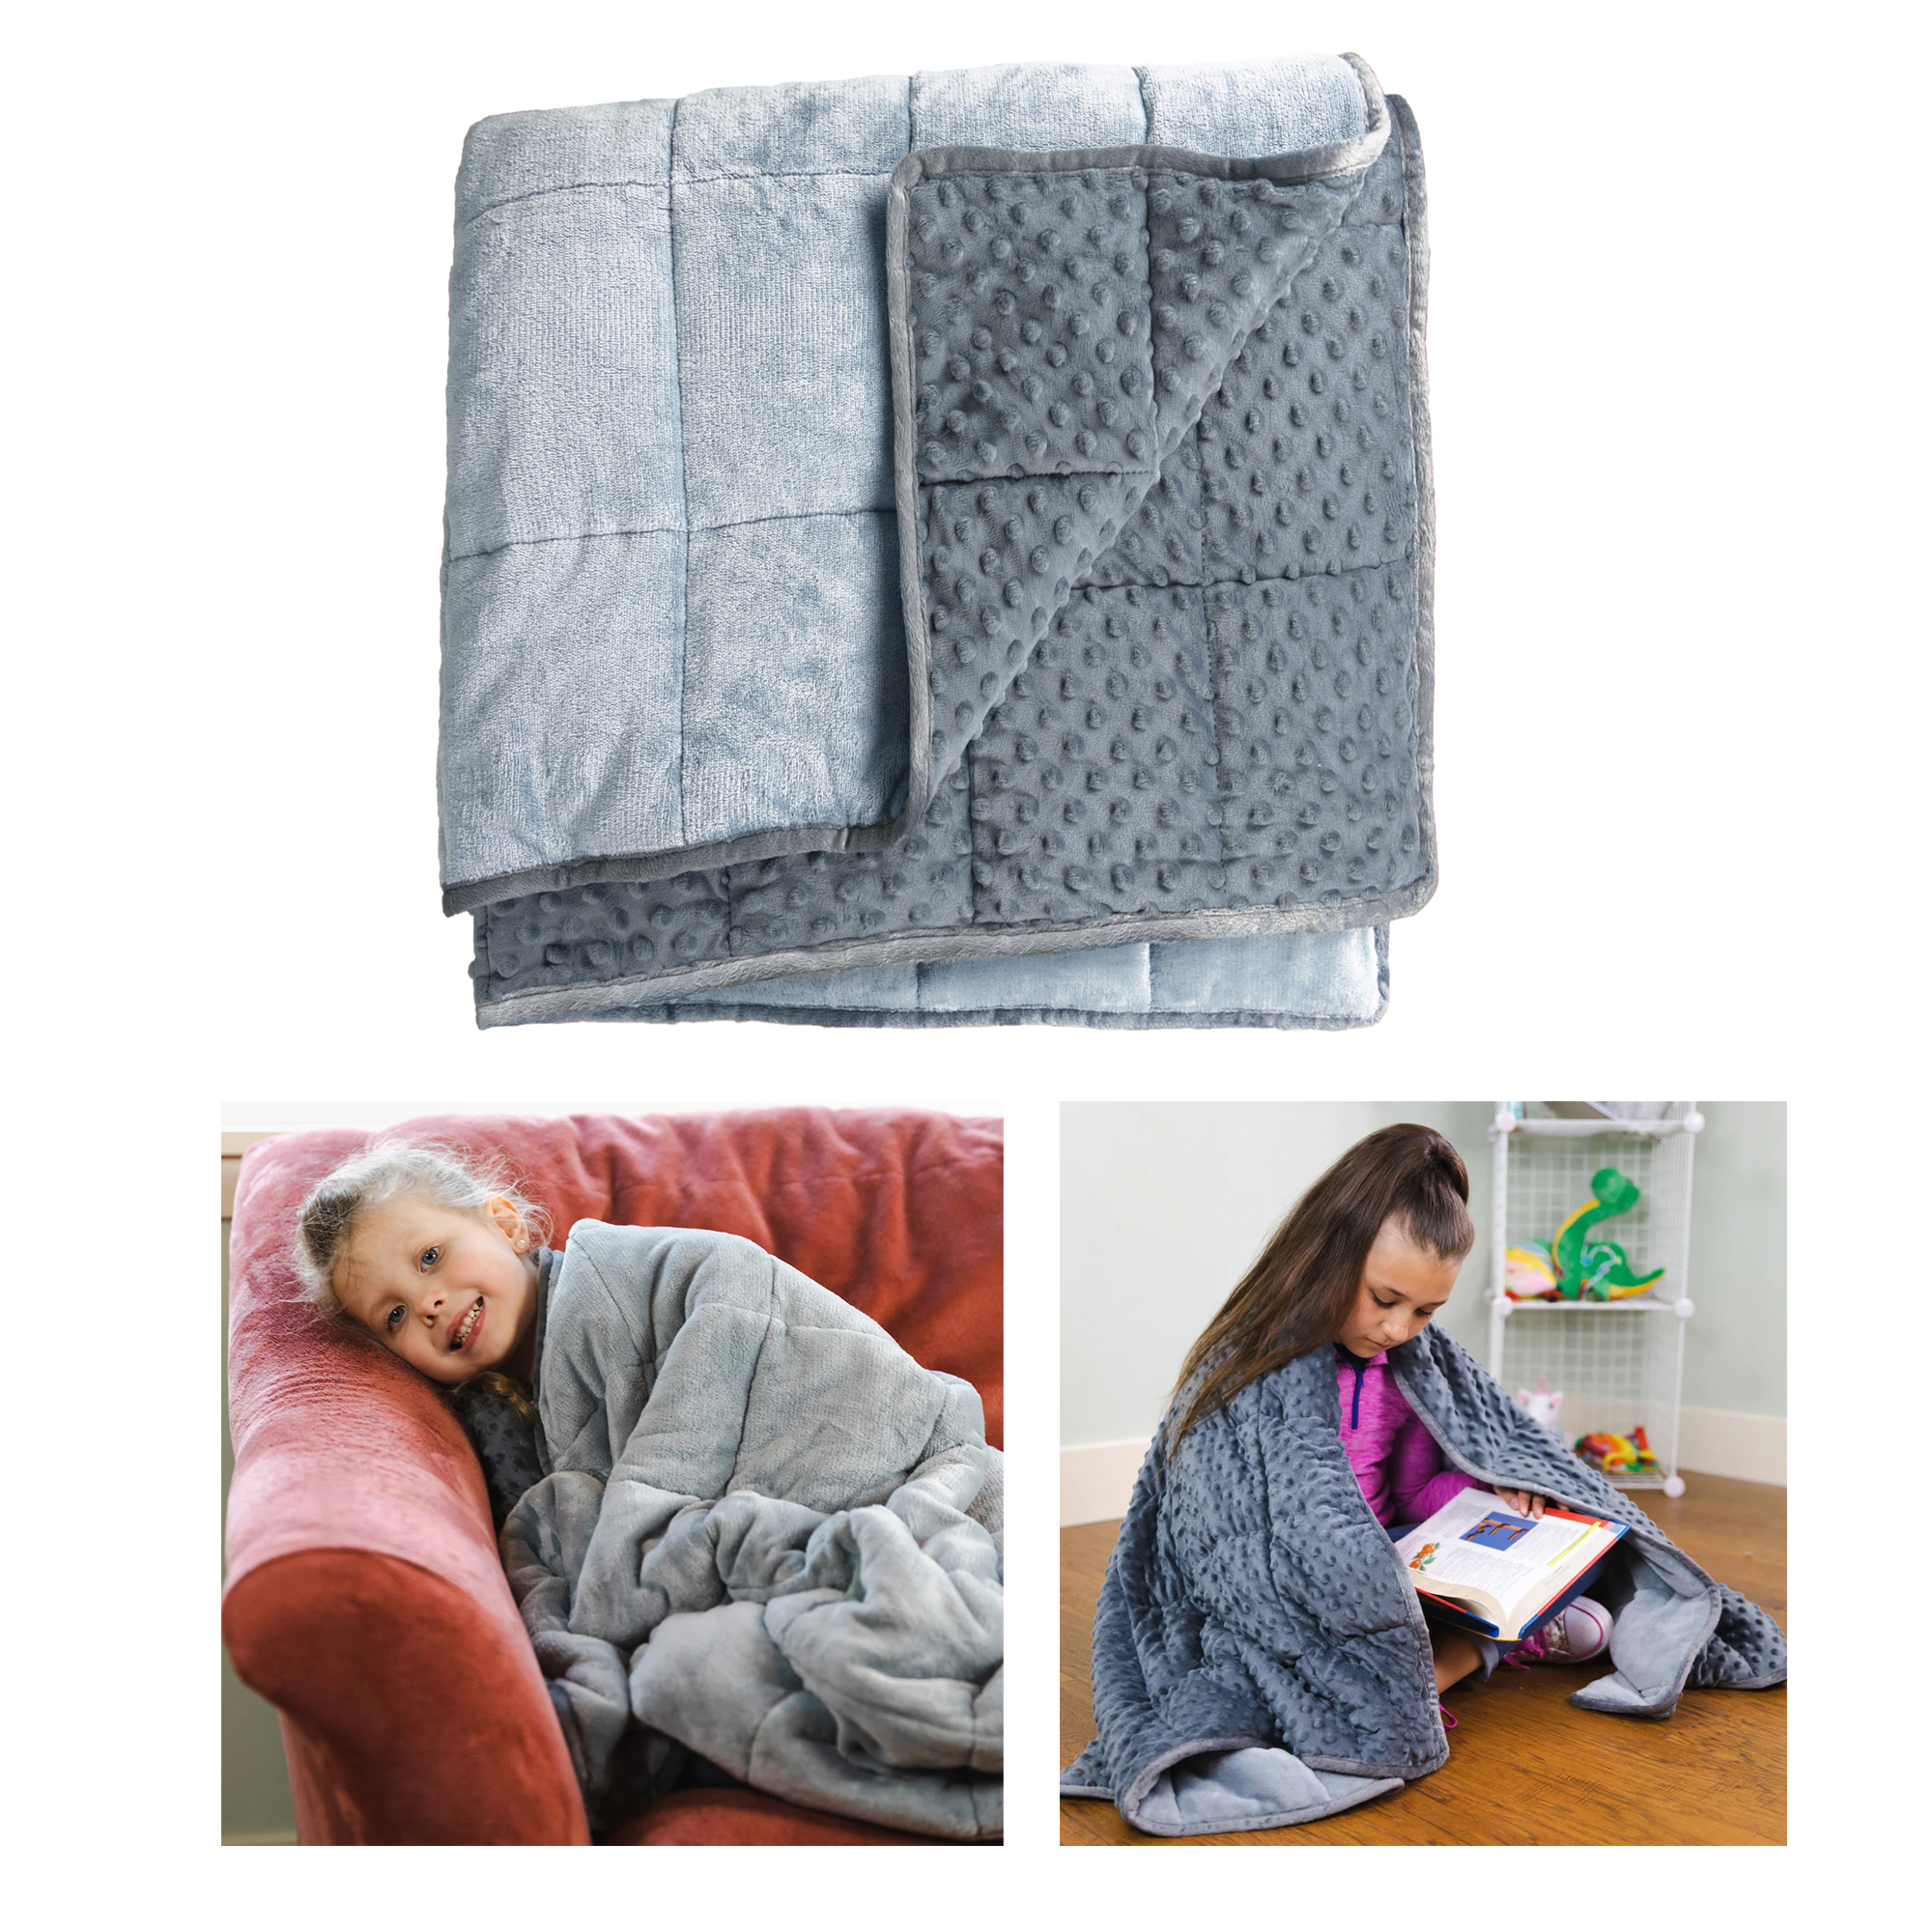 Bouncyband Sensory Weighted Dual Texture Shoulder Wrap for Kids, 40" x 12" image number null